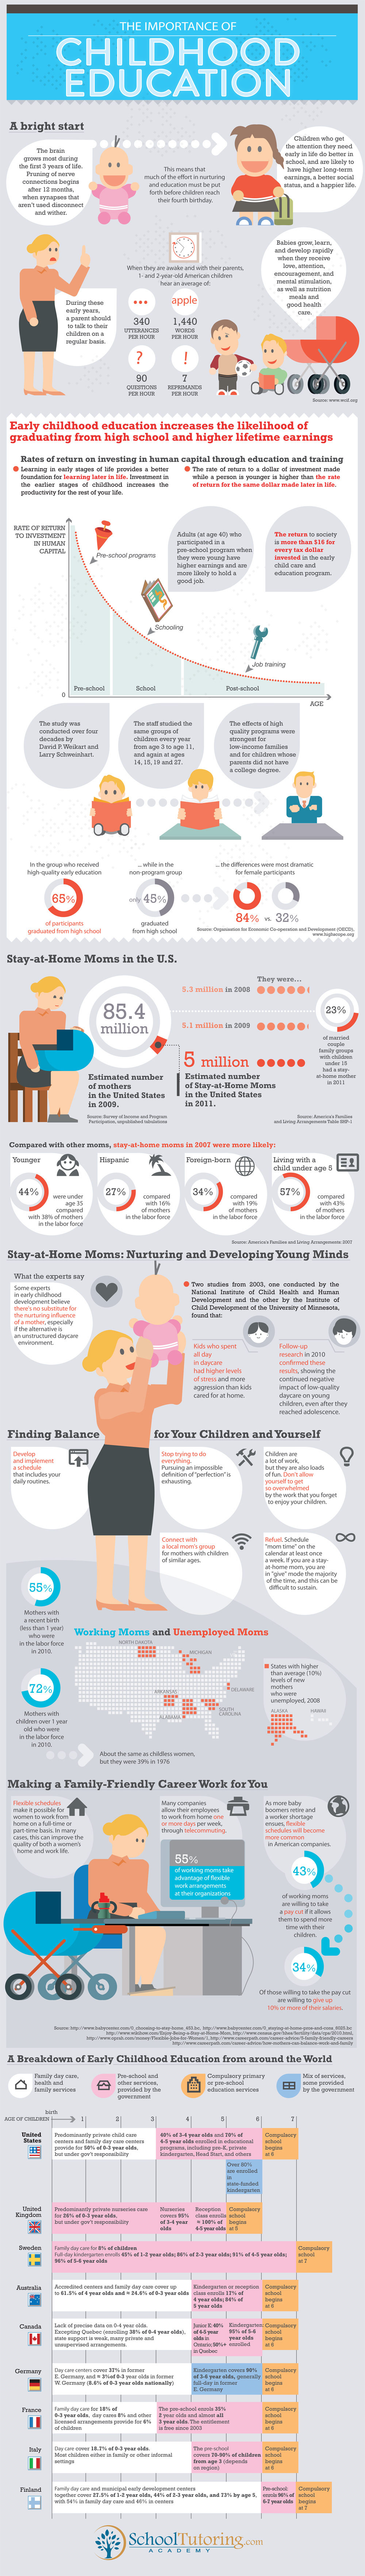 The Importance of Childhood Education [infographic] – An Infographic from SchoolTutoring.com